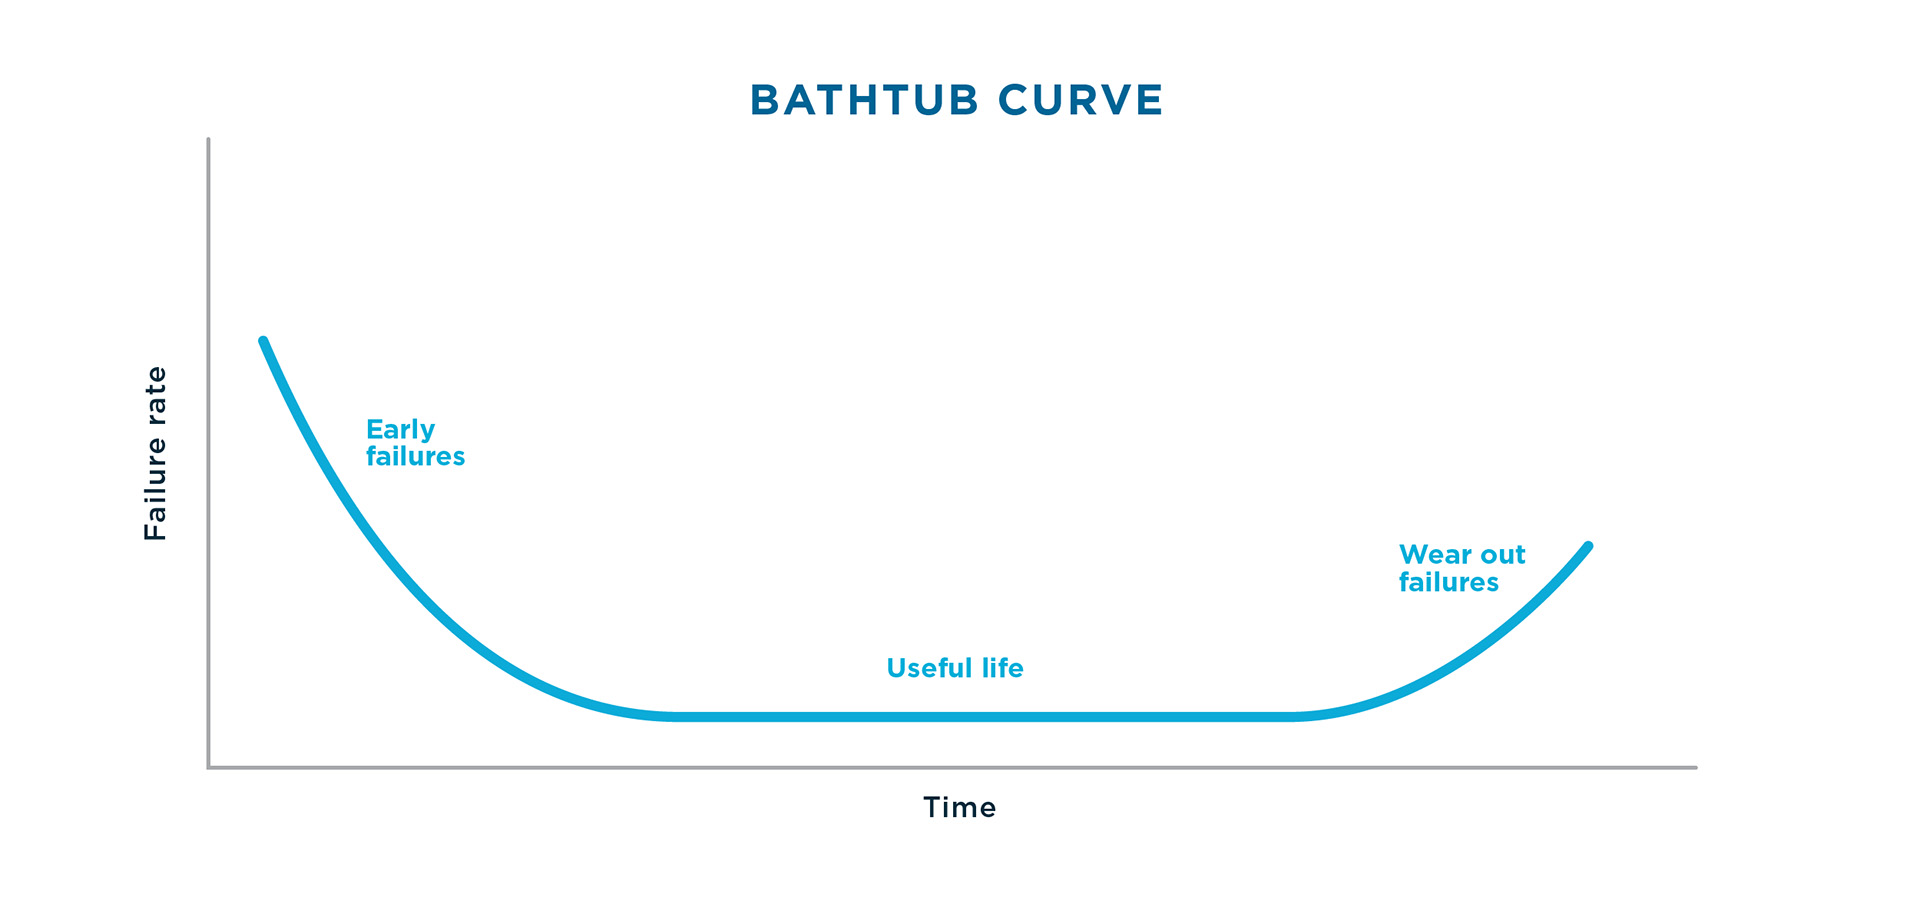 An image of a chart of equipment failure rate over time, the line graph resembles a bathtub